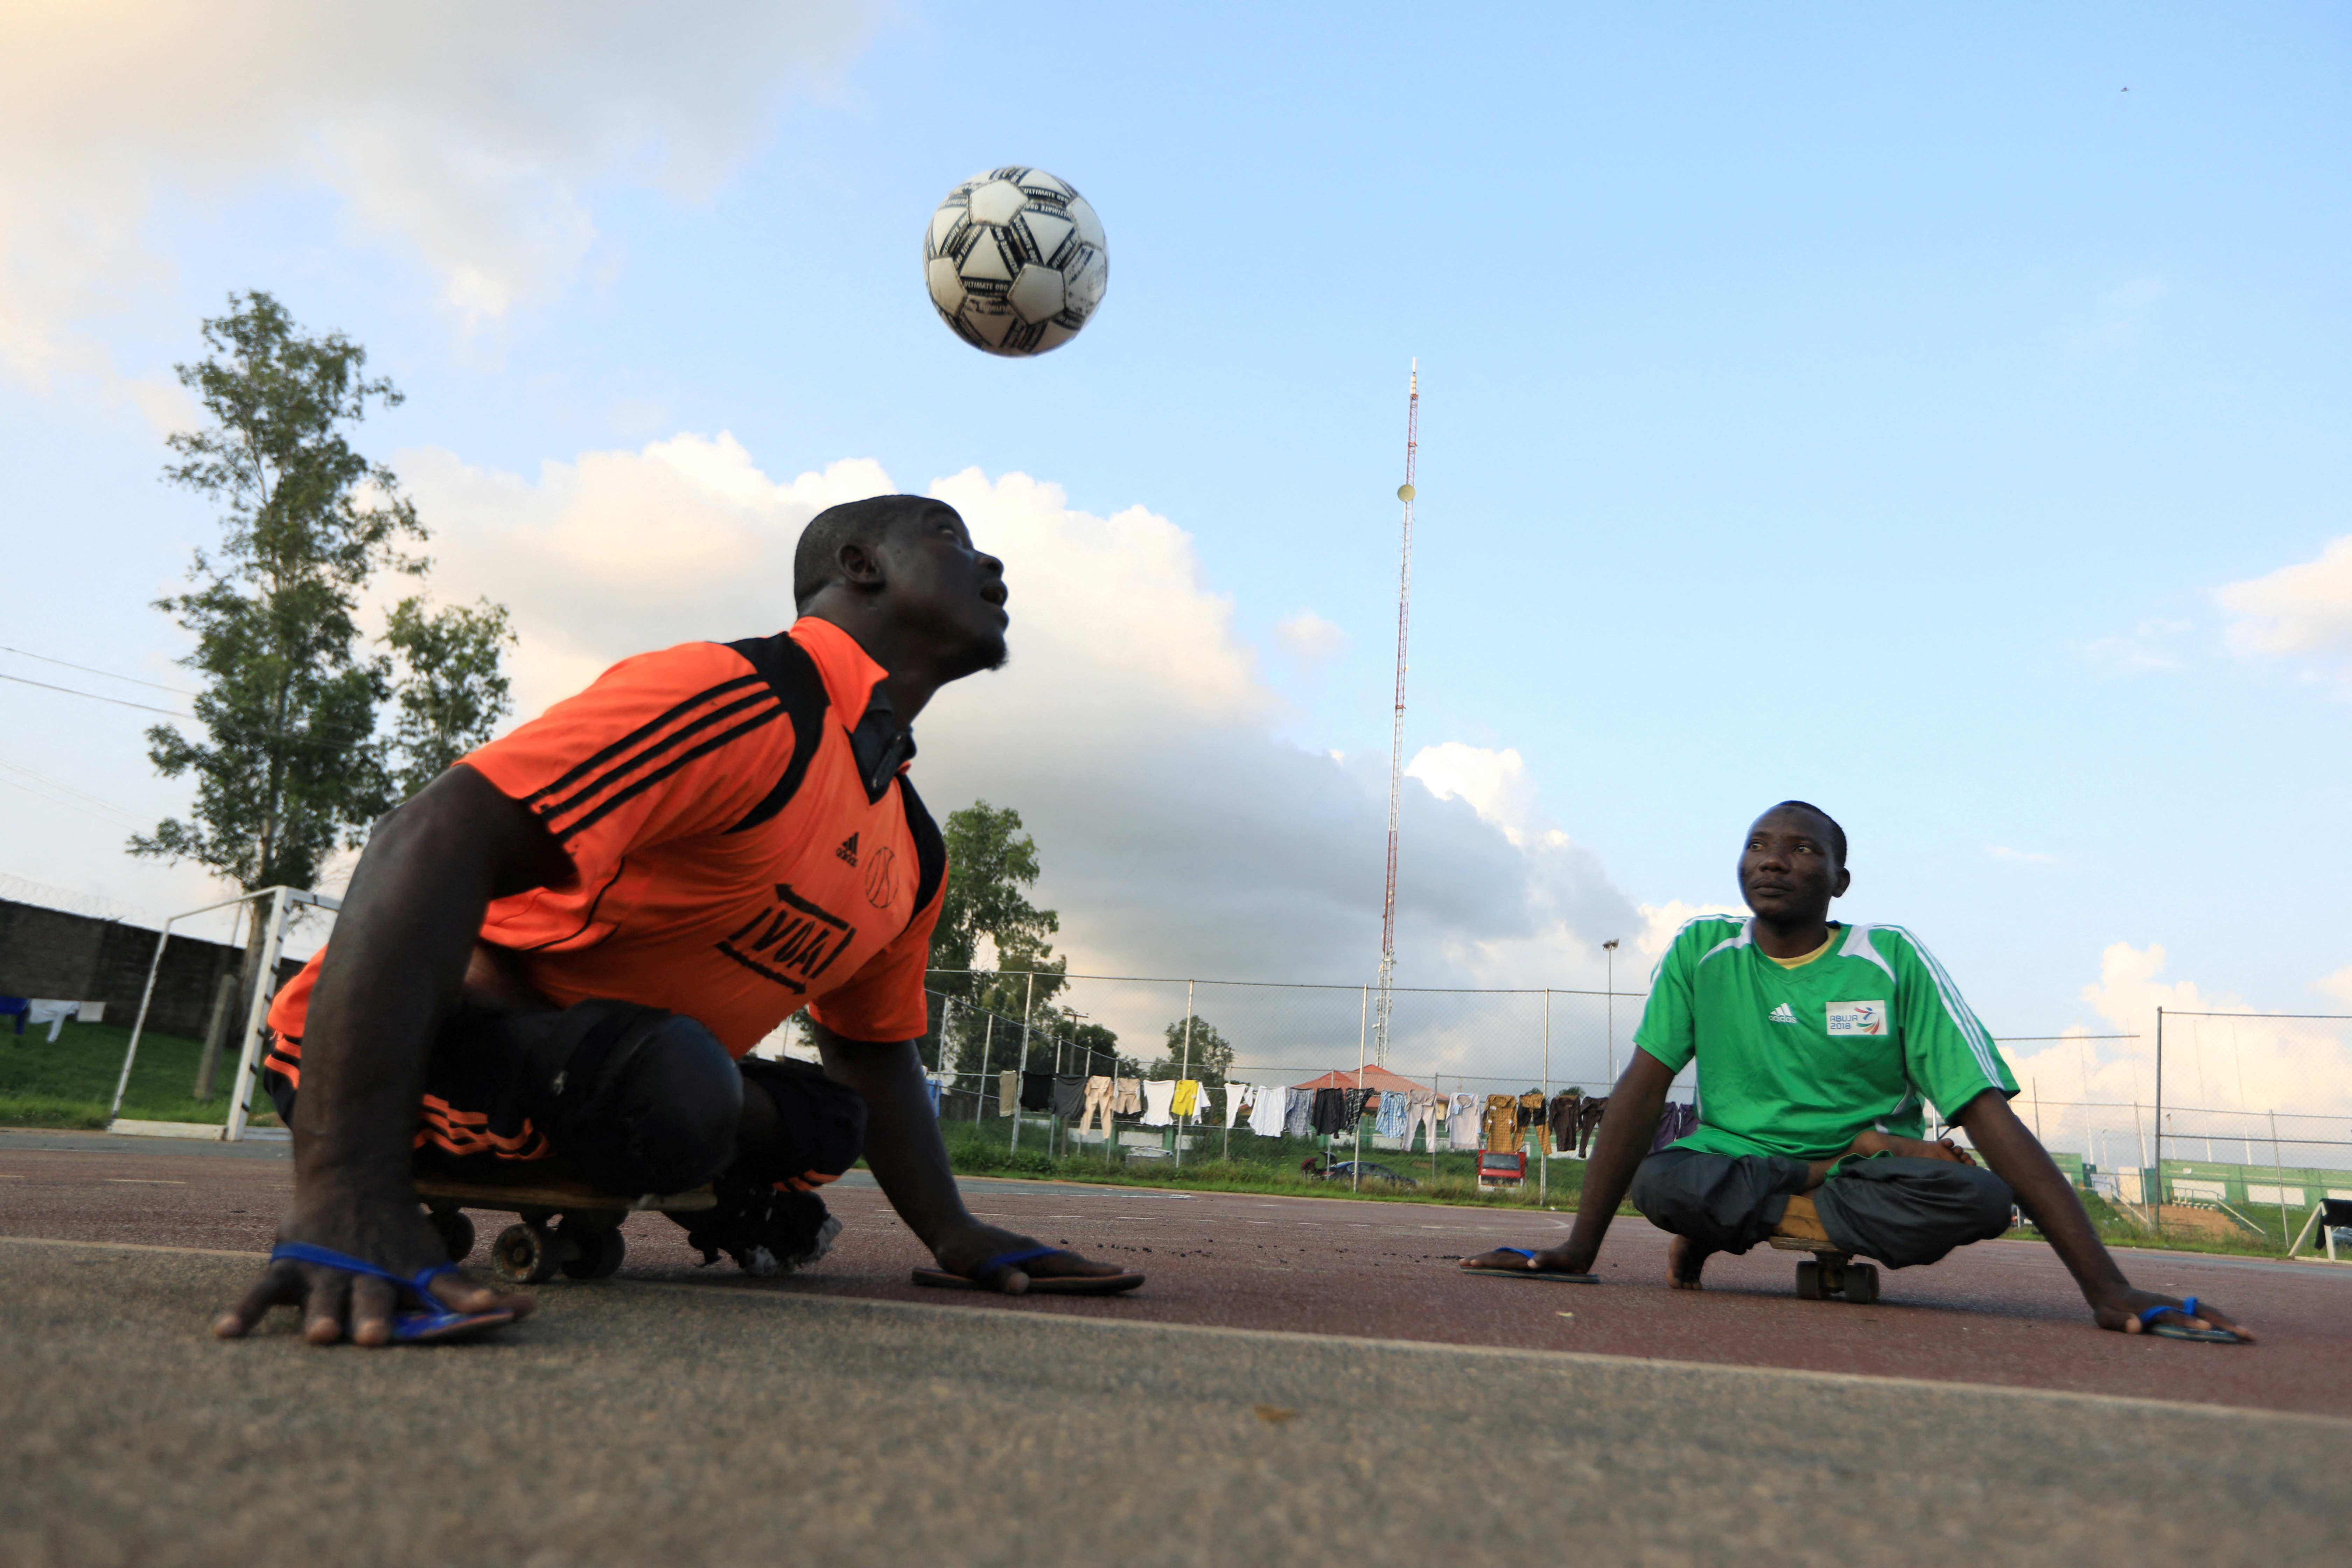 A victim of polio disease heads the ball during a game of para-soccer in Abuja